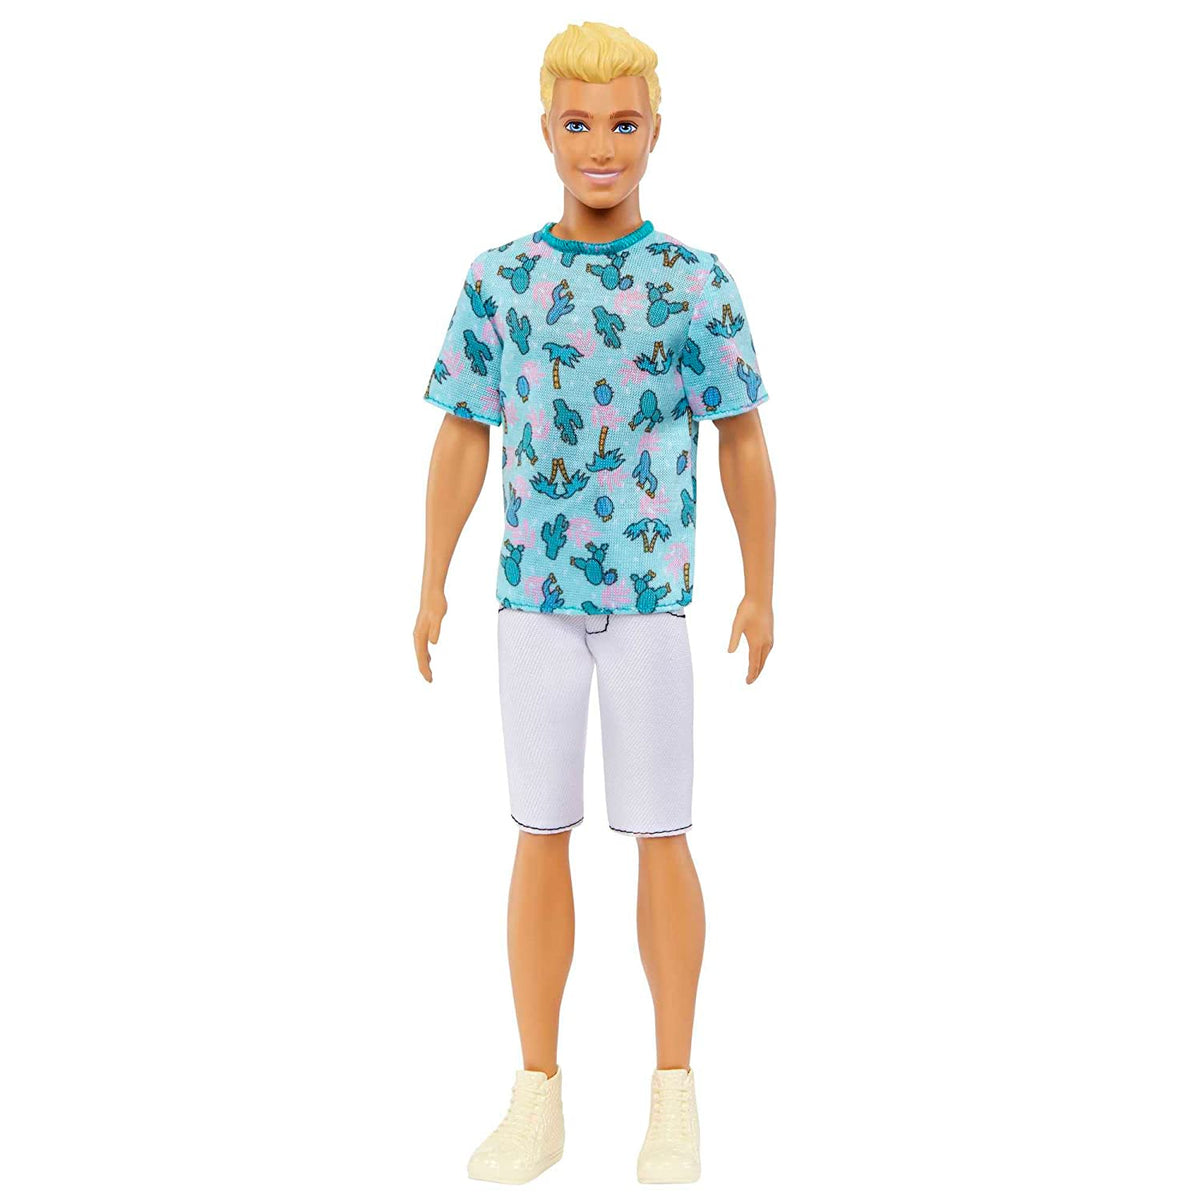 Barbie Ken Fashionistas with Blond Hair Doll Wearing Cactus Tee and White Shorts with Sneakers #211 for Kids Ages 3+